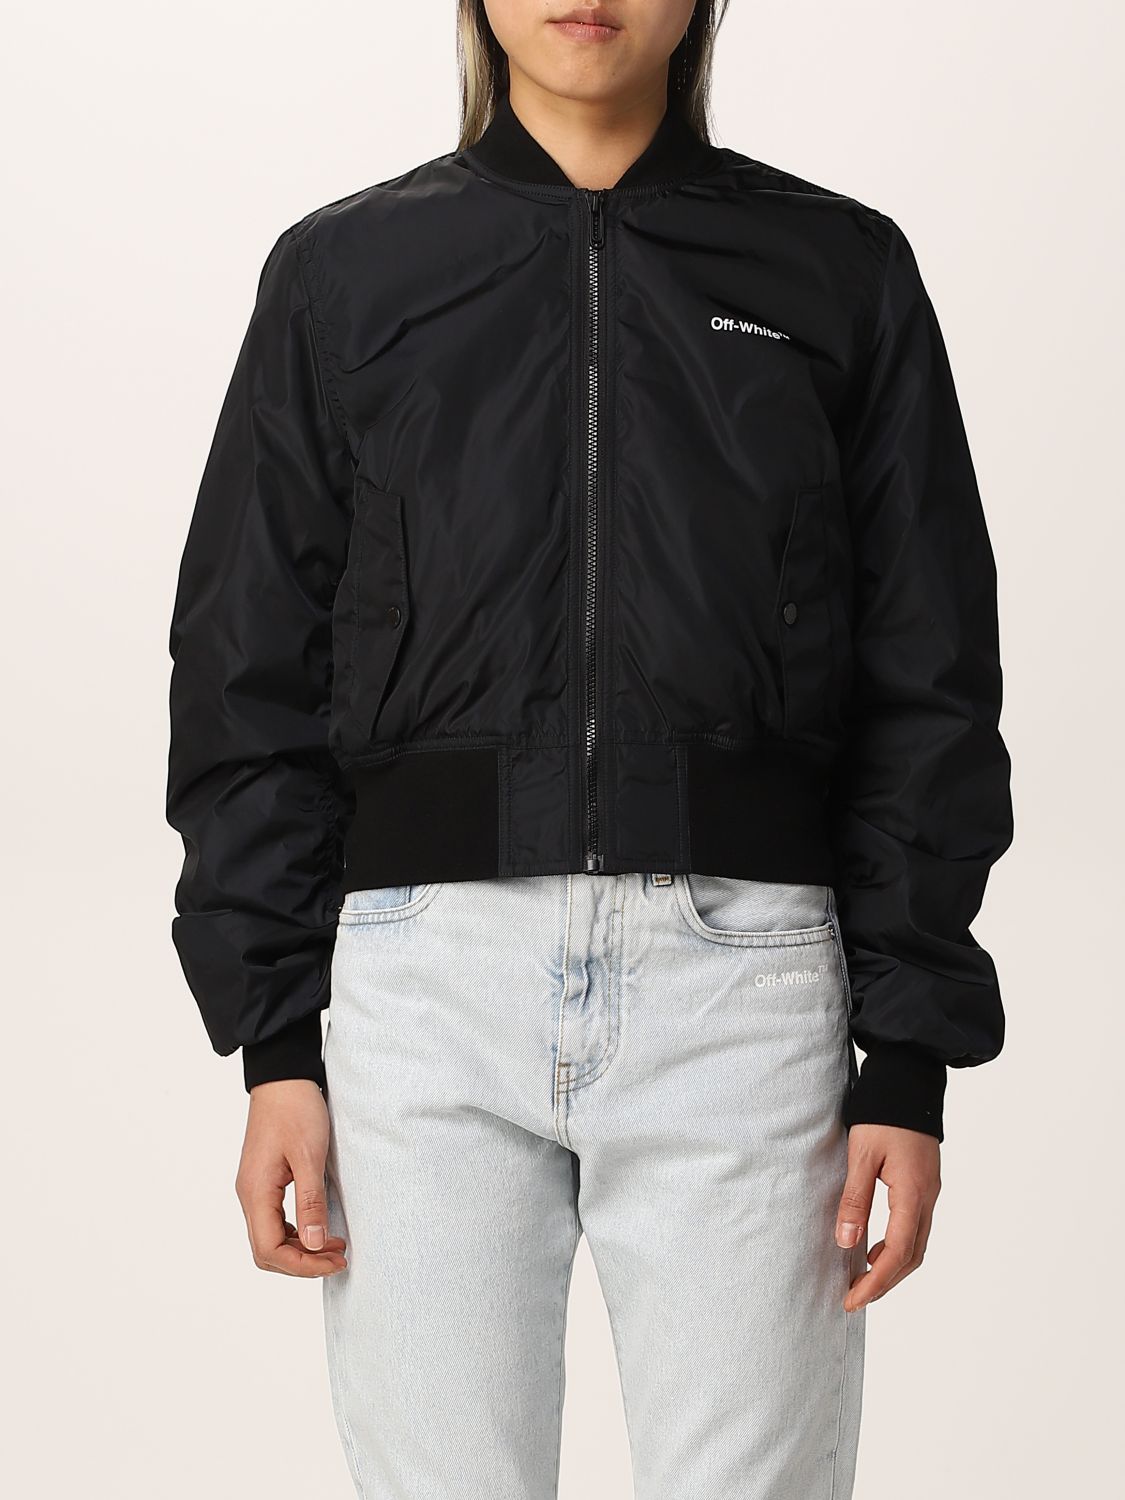 OFF-WHITE: Off White bomber in technical fabric - Black | Off-White ...